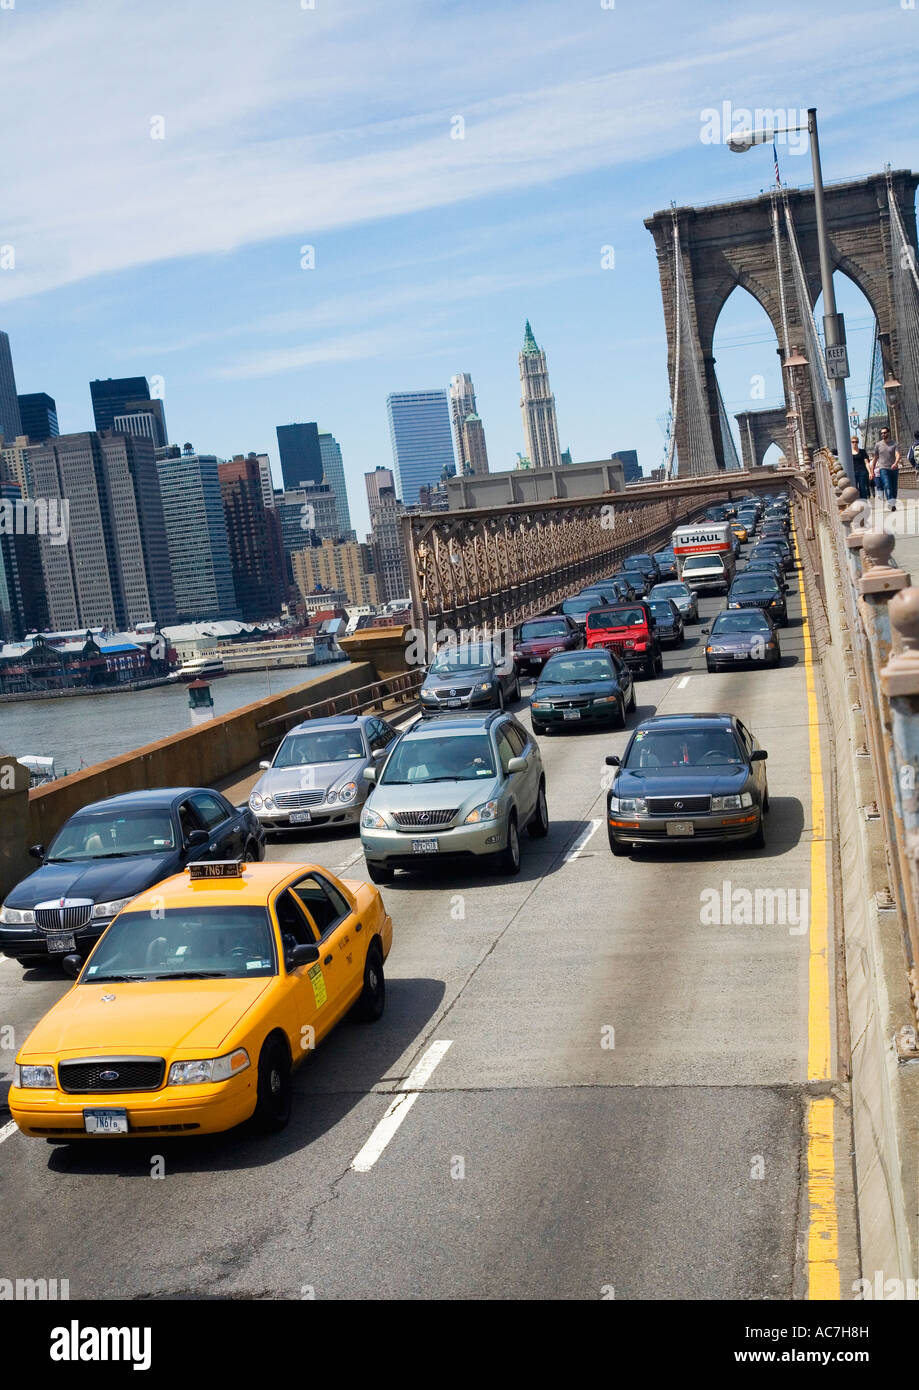 Yellow taxi cab and other traffic on the Brooklyn Bridge looking to Lower Manhattan downtown New York City NYC NY Stock Photo